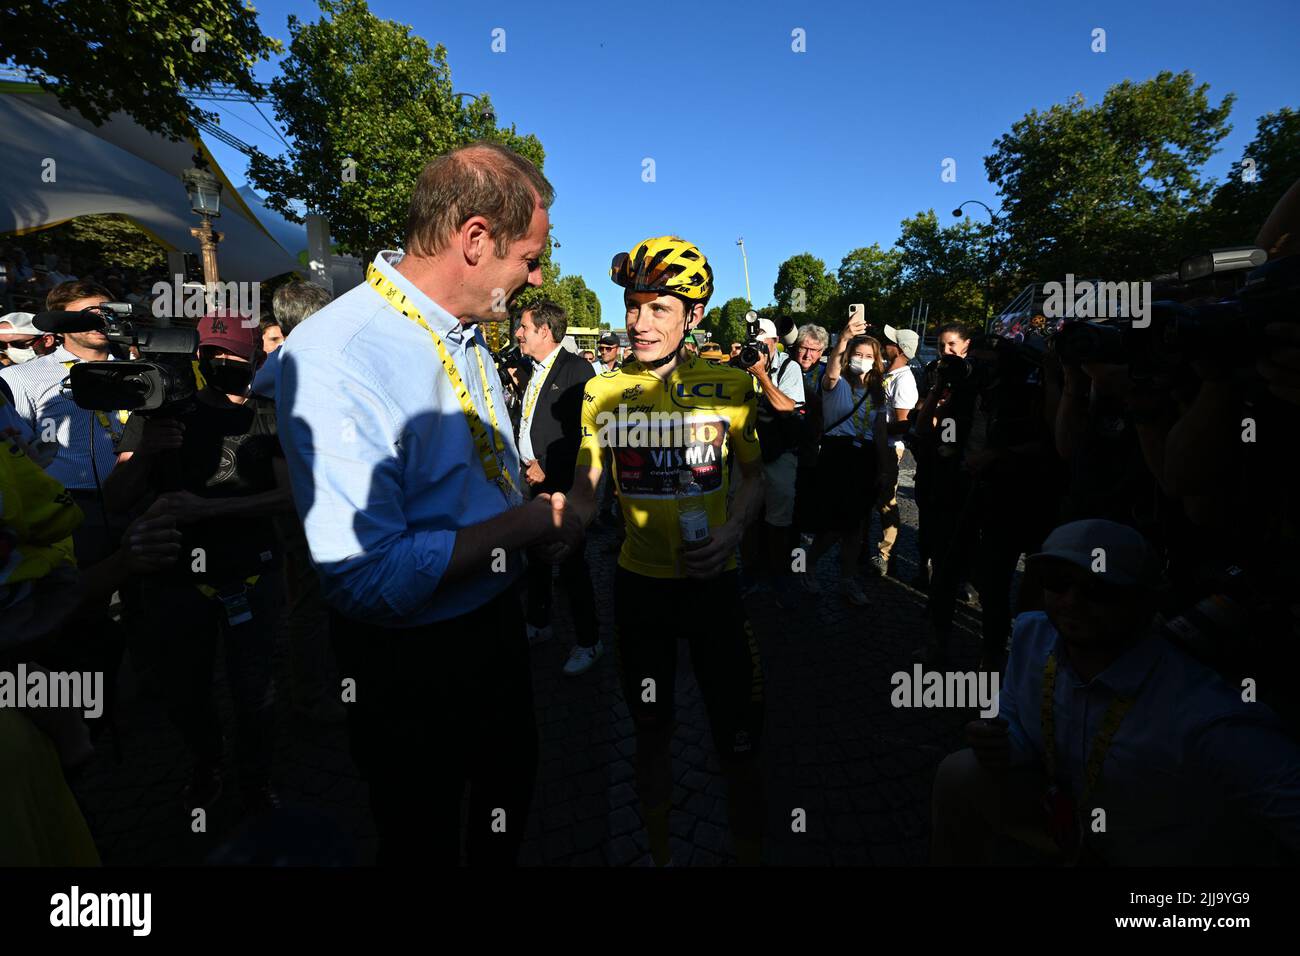 Champs-Elysees, France, 24 July 2022. Christian Prudhomme, cycling director of ASO (Amaury Sport Organisation) and Danish Jonas Vingegaard of Jumbo-Visma wearing the yellow jersey of leader in the overall ranking shake hands after stage 21, the final stage of the Tour de France cycling race, from Paris la Defense Arena to Paris Champs-Elysees, France, on Sunday 24 July 2022. This year's Tour de France takes place from 01 to 24 July 2022. BELGA PHOTO POOL VINCENT KALUT - UK OUT Stock Photo